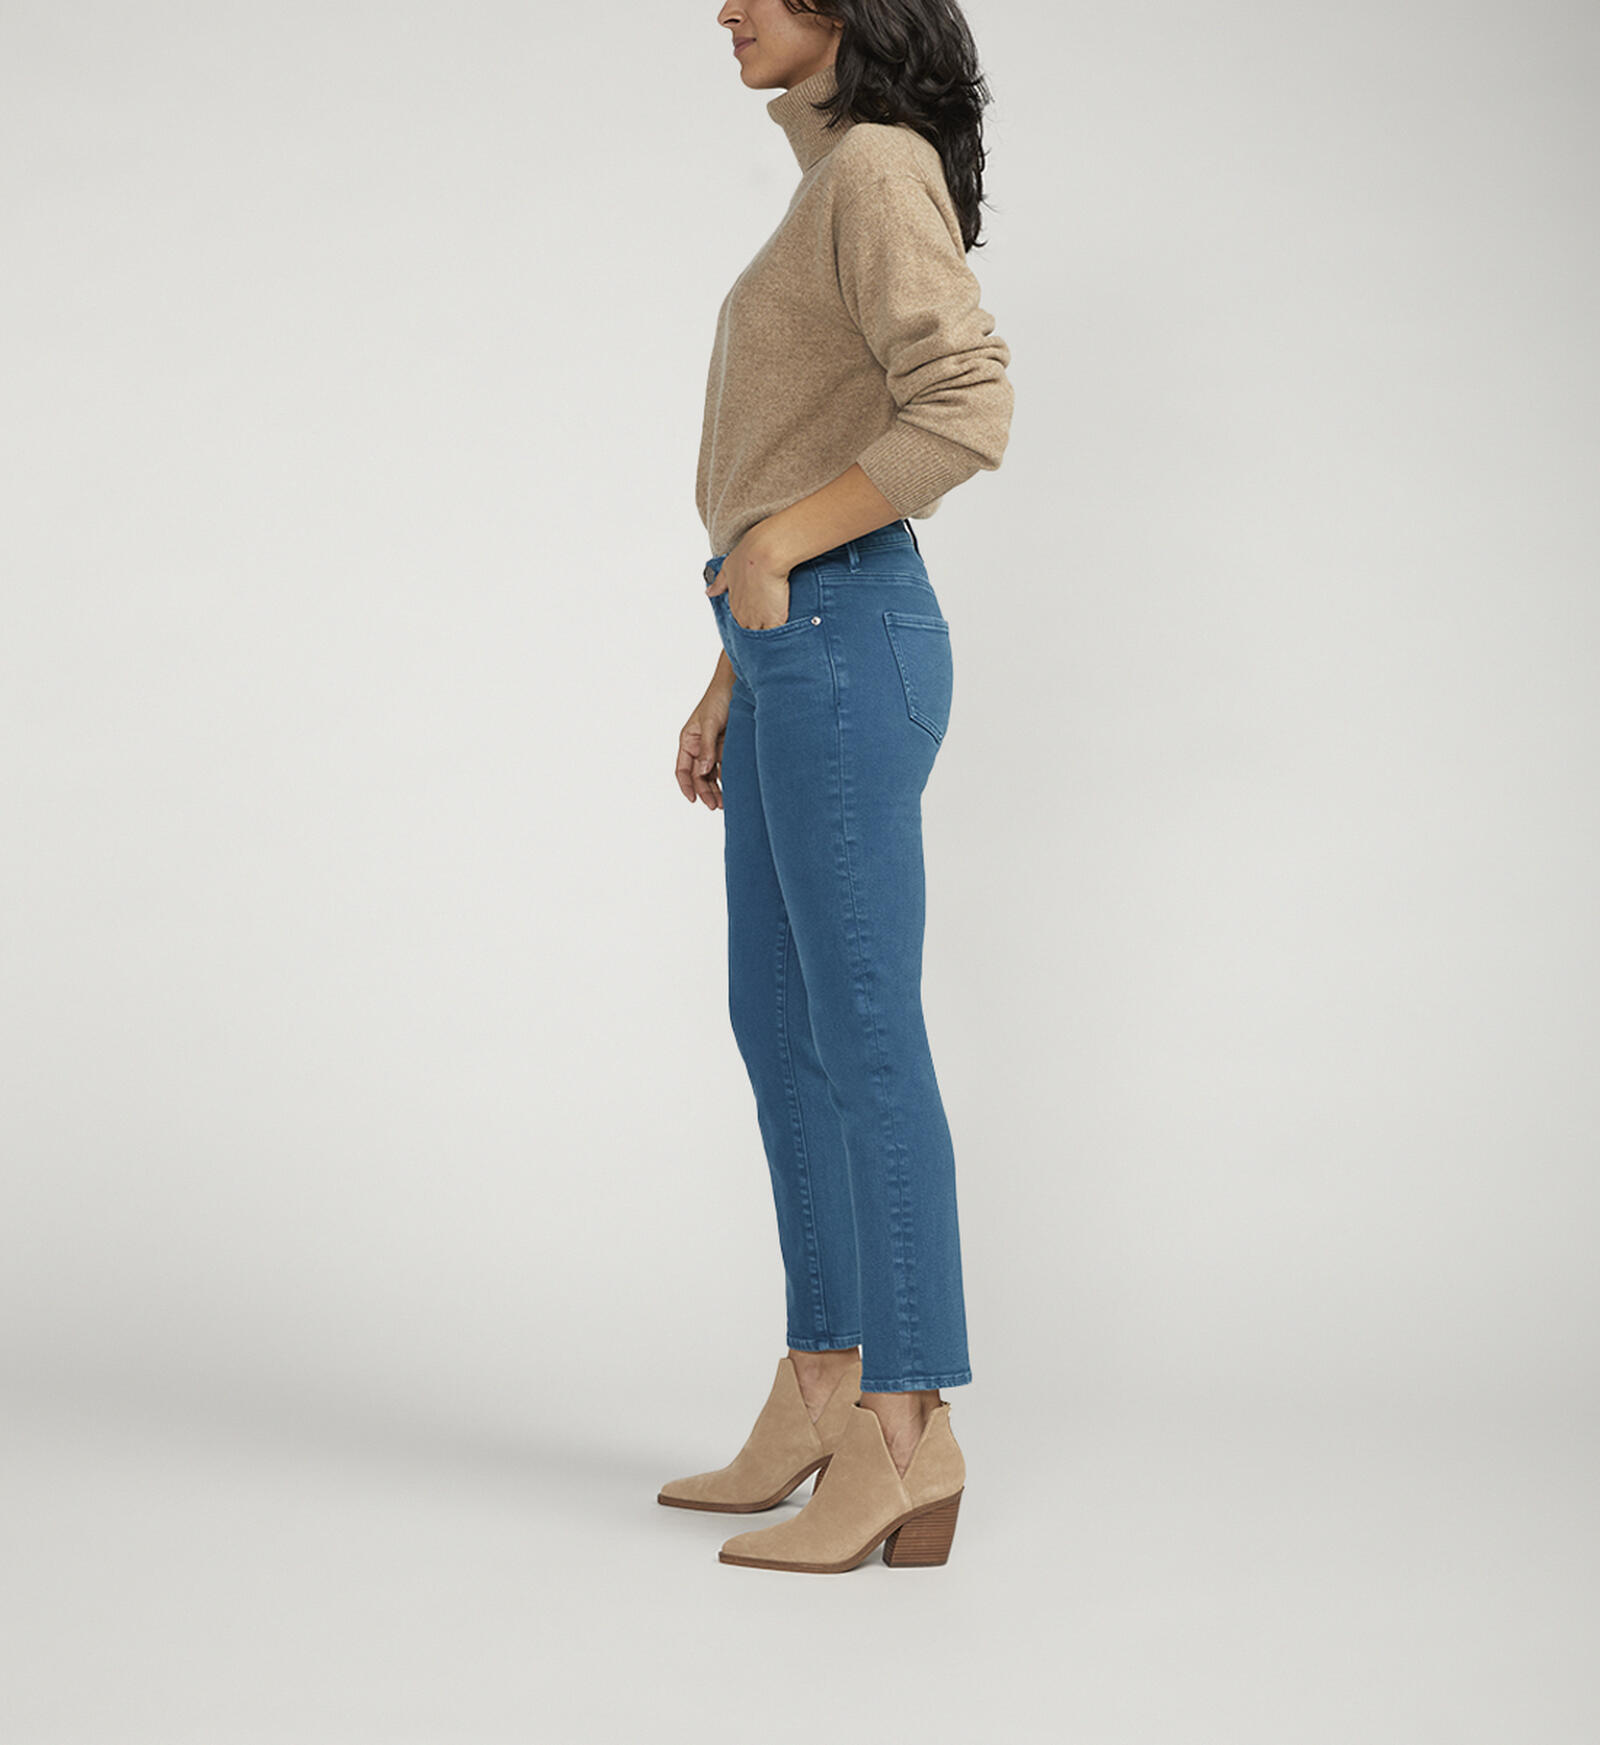 Buy Cassie Mid Rise Slim Straight Leg Jeans for USD 46.00